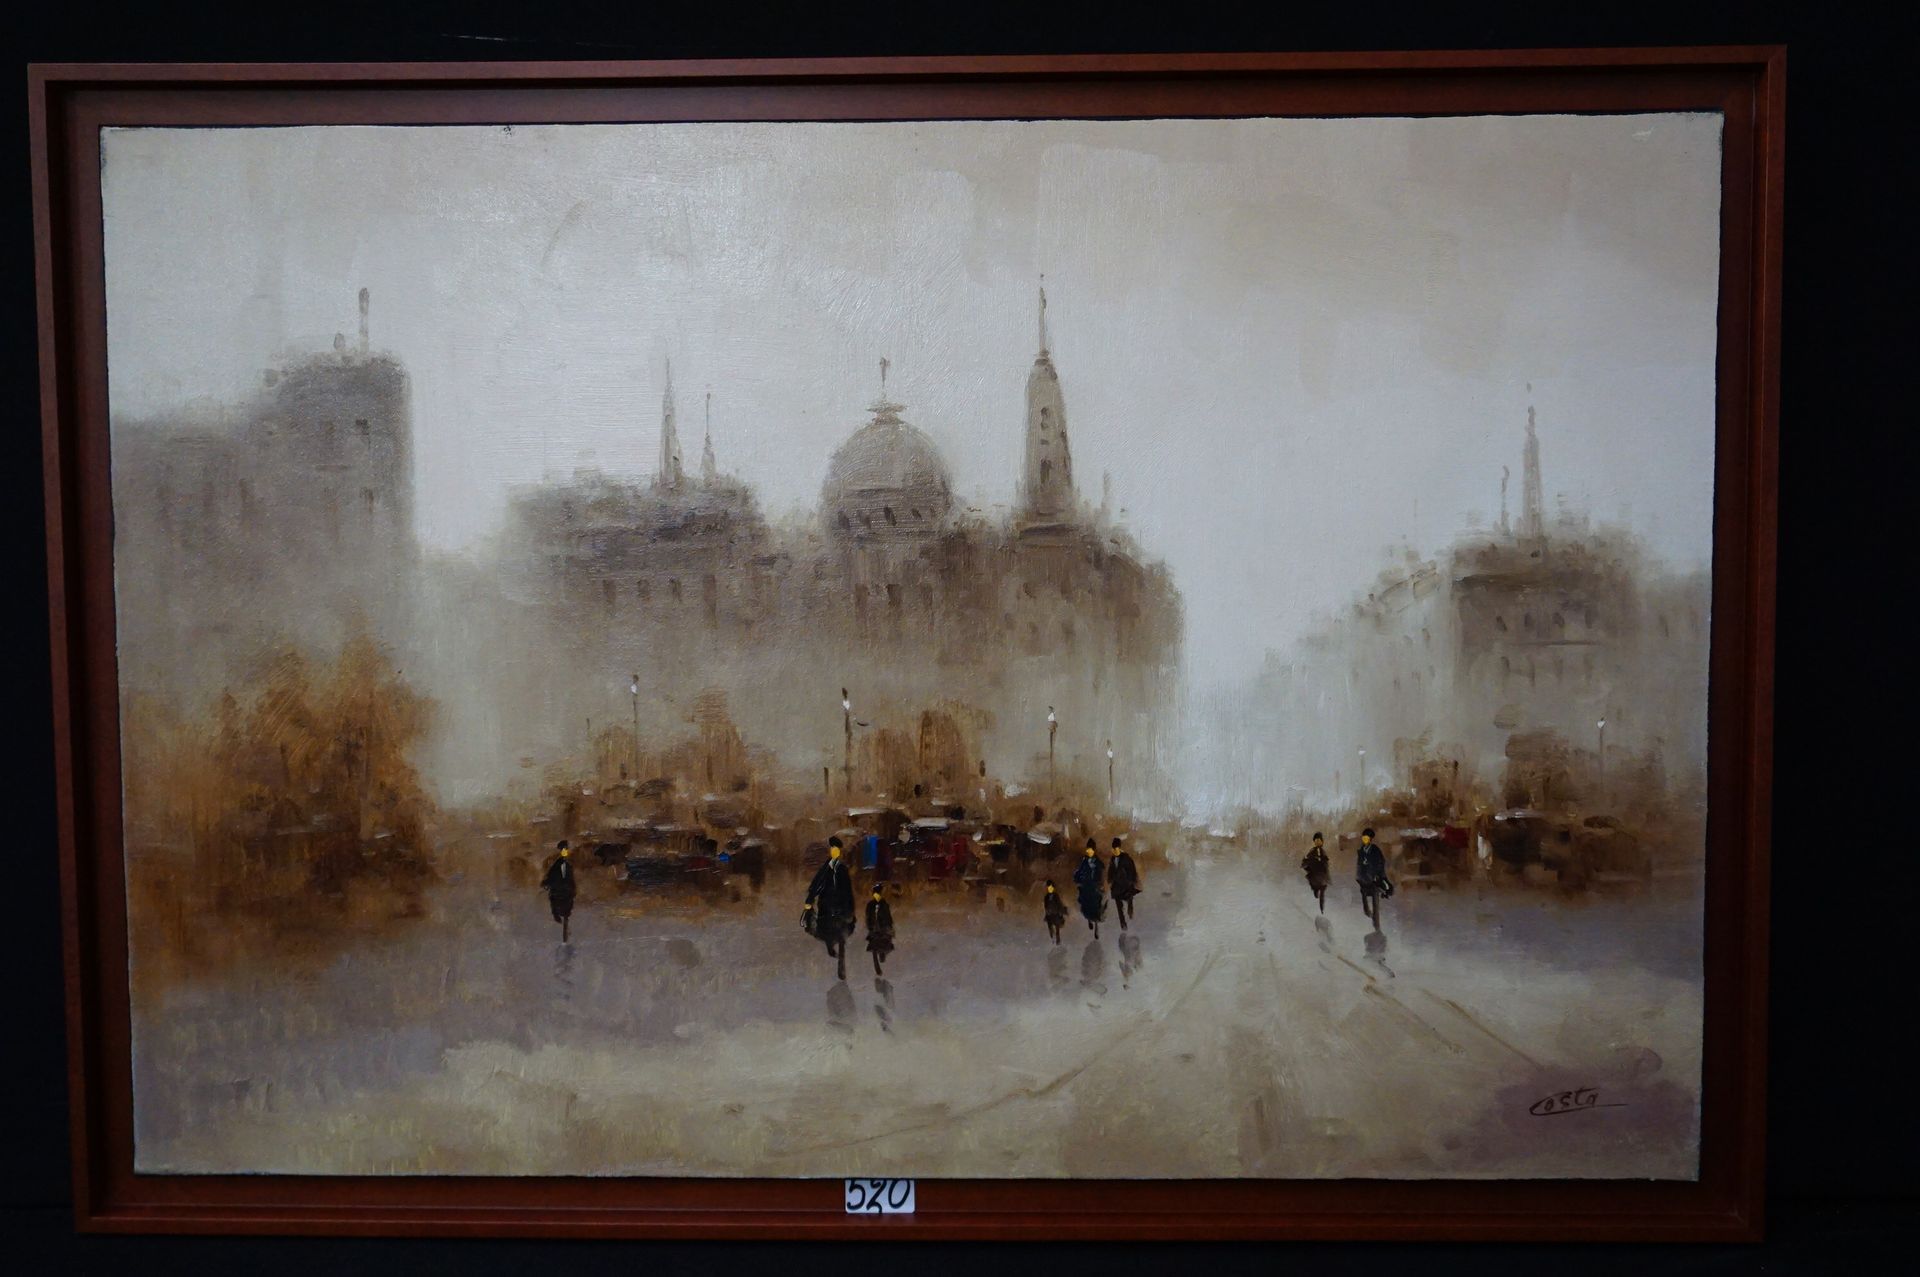 COSTA "Walkers in Barcelona" - Oil on canvas - Signed - 60 x 90 cm